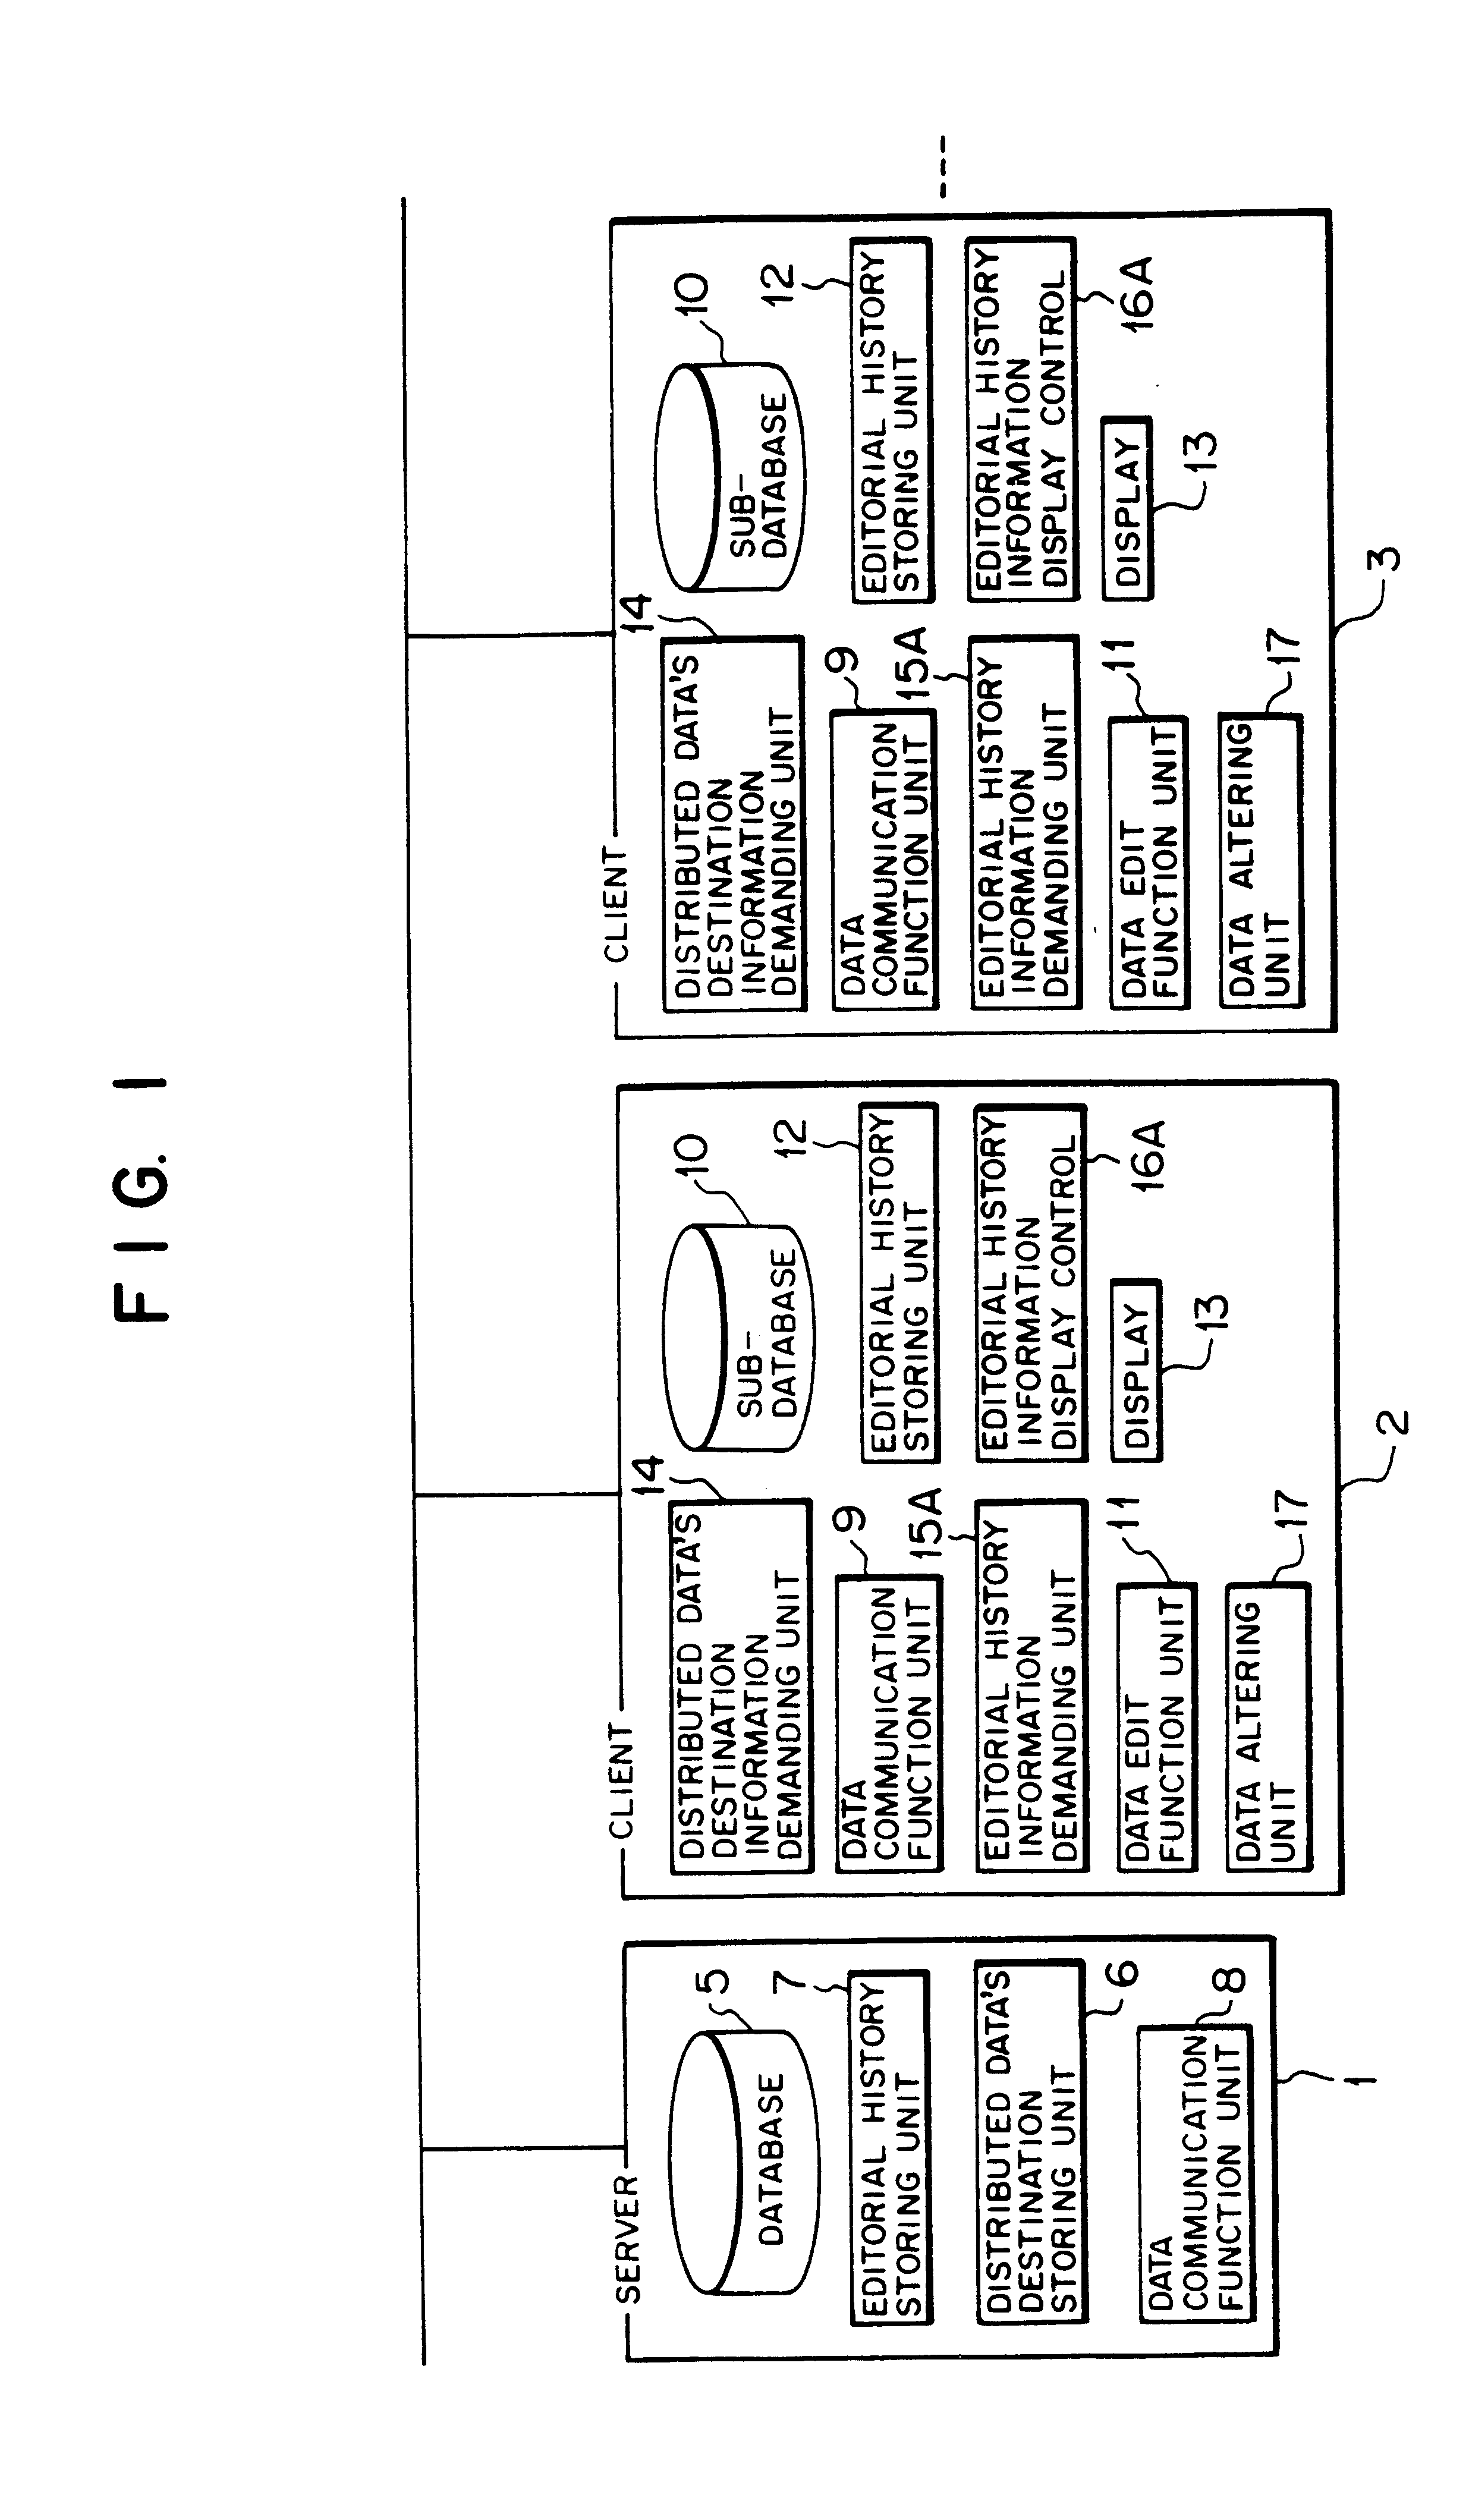 Method and apparatus for confirming matching of data in a distributed processing system